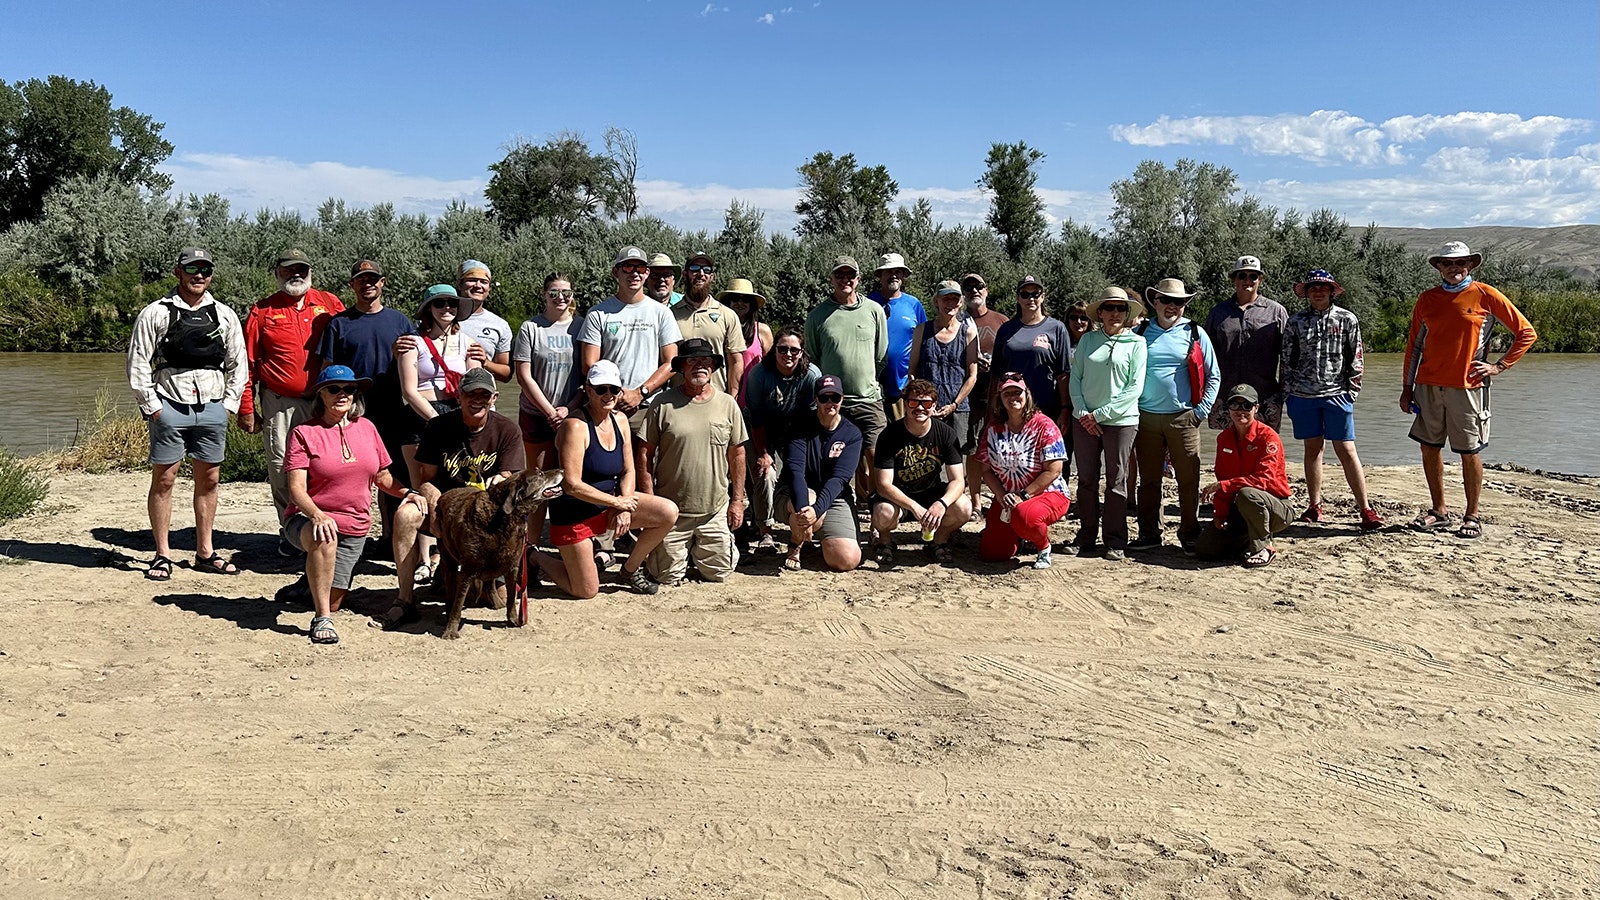 The participants in the Bighorn River Blueway Community Float before casting off from Basin. It takes between four and five hours to float the 11-mile expanse from Basin to Greybull.